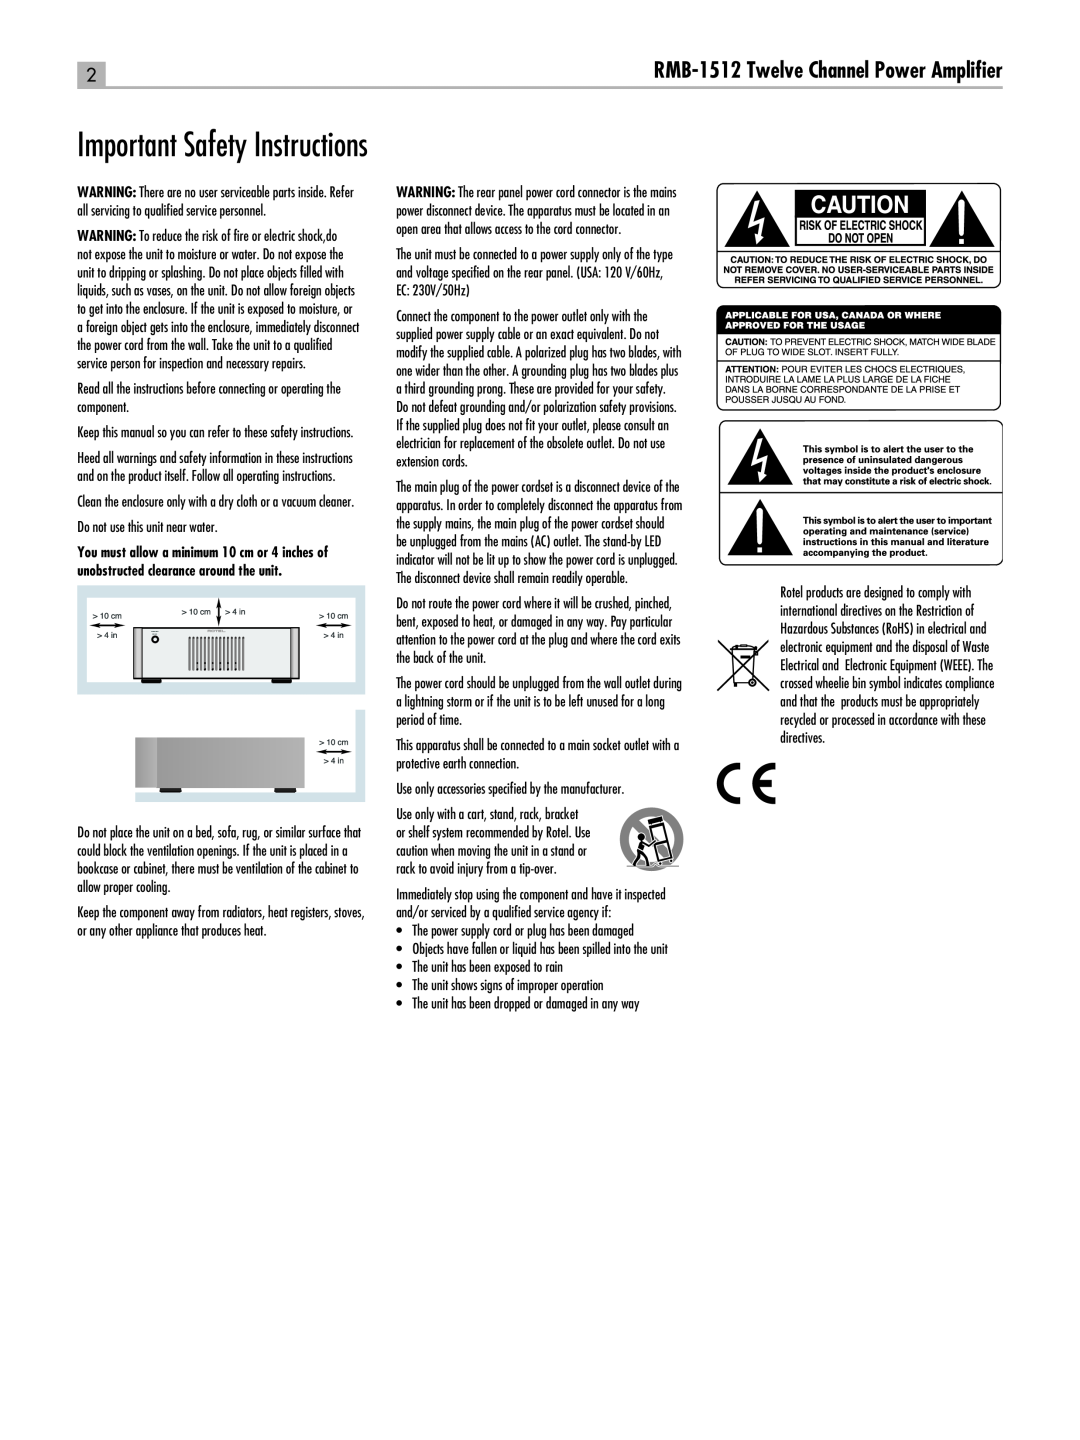 Rotel RC-1580 owner manual Important Safety Instructions, RMB-1512Twelve Channel Power Ampliﬁer 